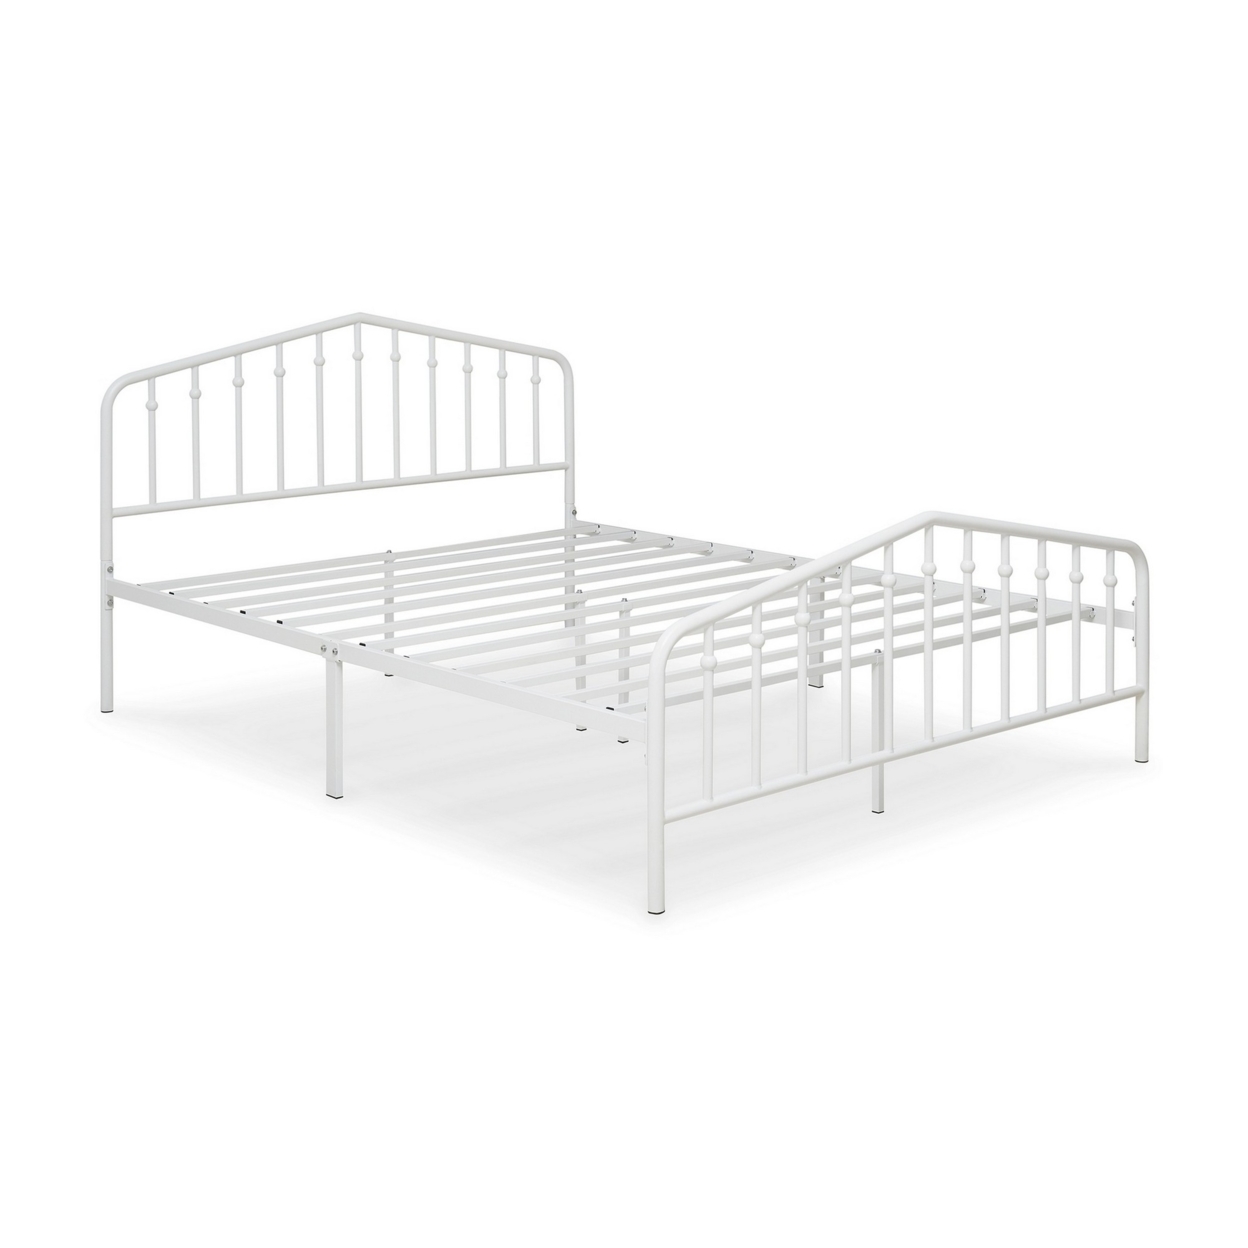 Queen Size Platform Bed, Classic Arched Headboard, White Metal Frame